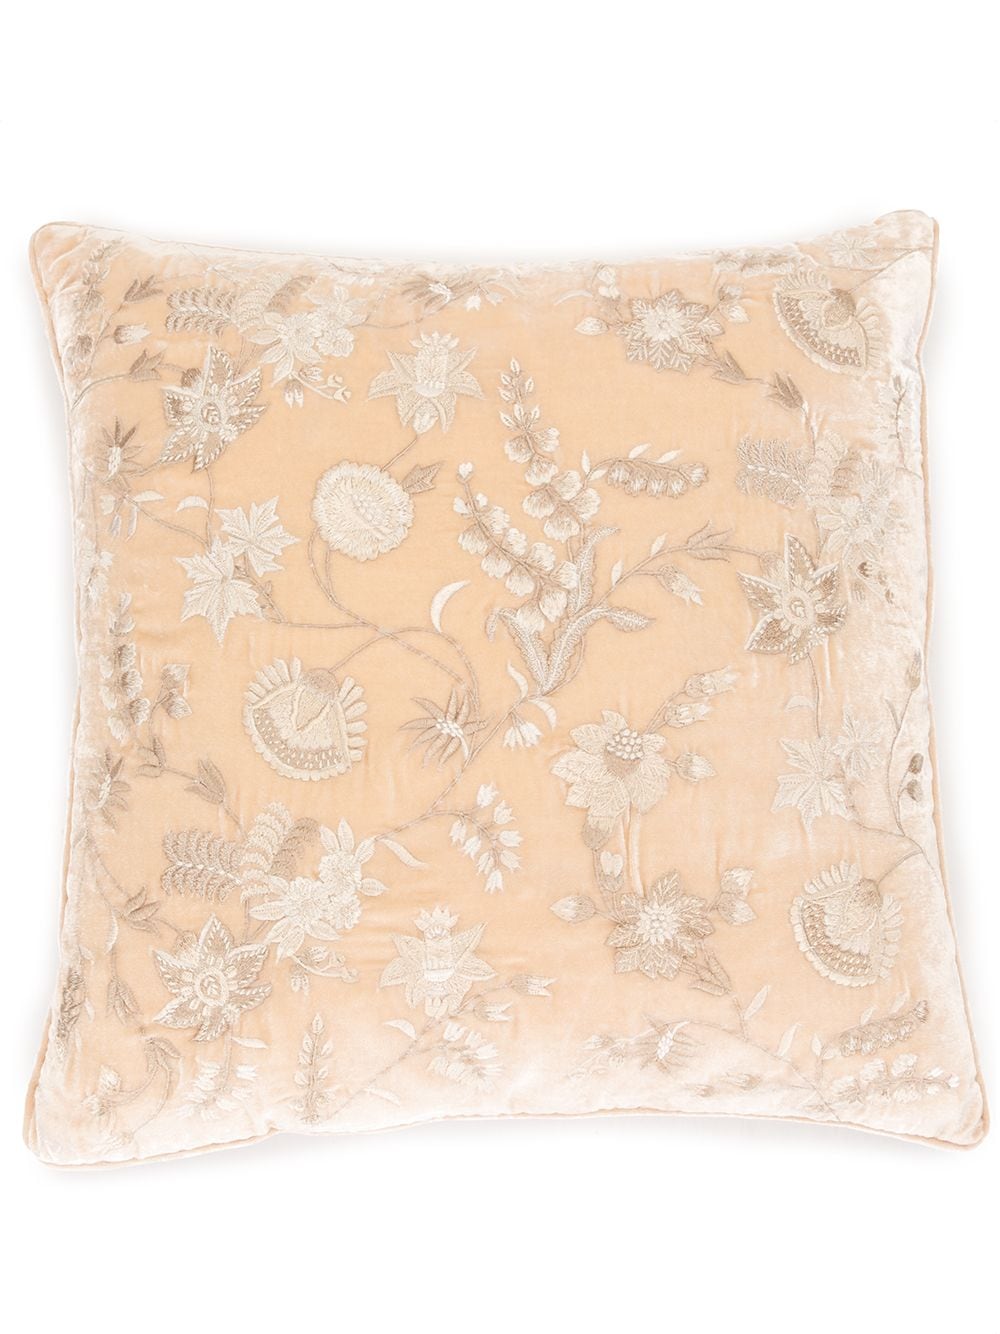 фото Anke drechsel embroidered floral cushion